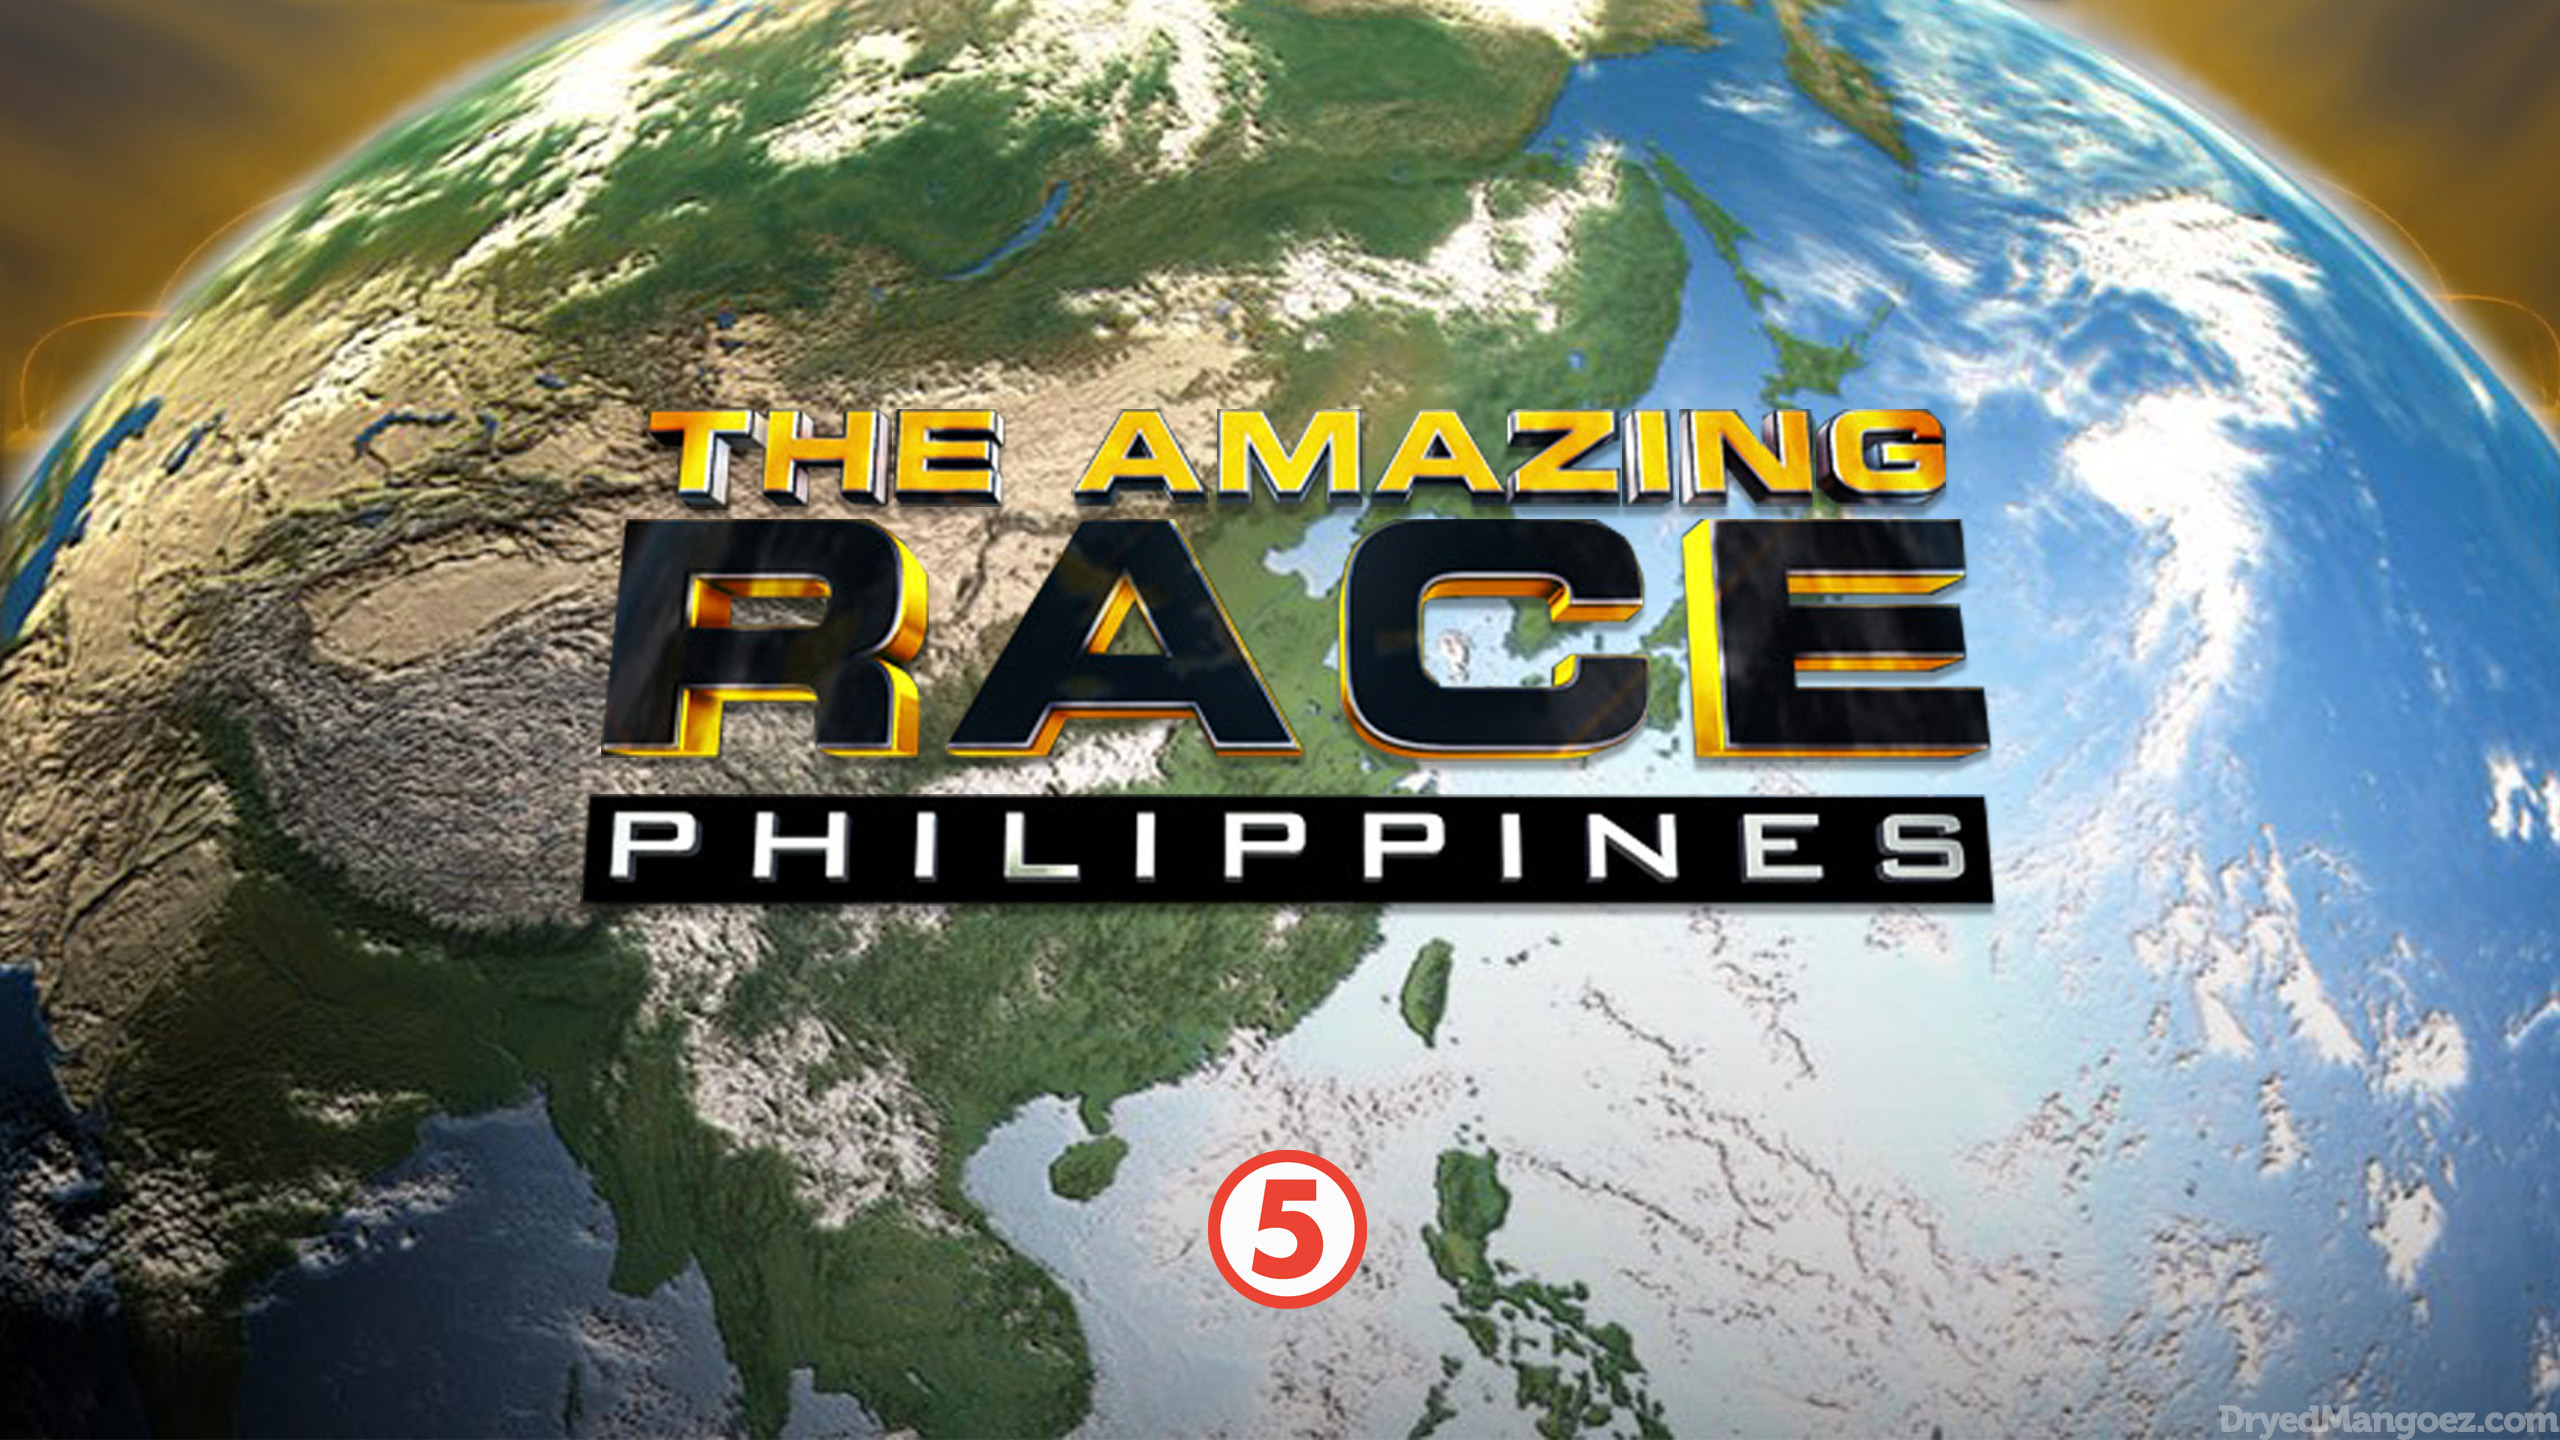 Concept/Pitch: Relaunching “The Amazing Race Philippines” on TV5